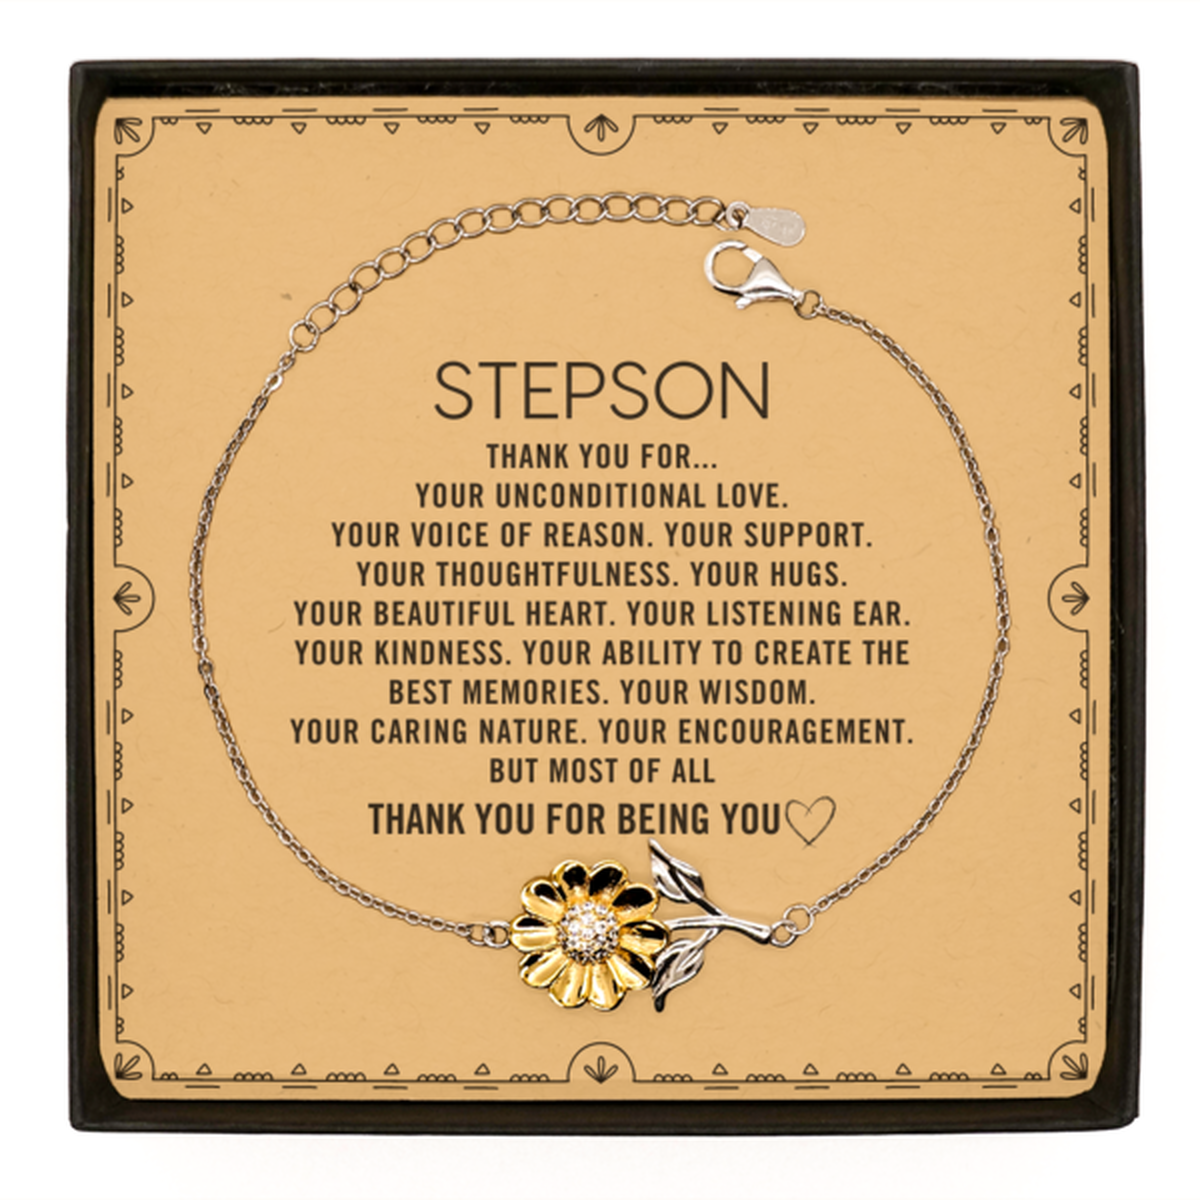 Stepson Sunflower Bracelet Custom, Message Card Gifts For Stepson Christmas Graduation Birthday Gifts for Men Women Stepson Thank you for Your unconditional love